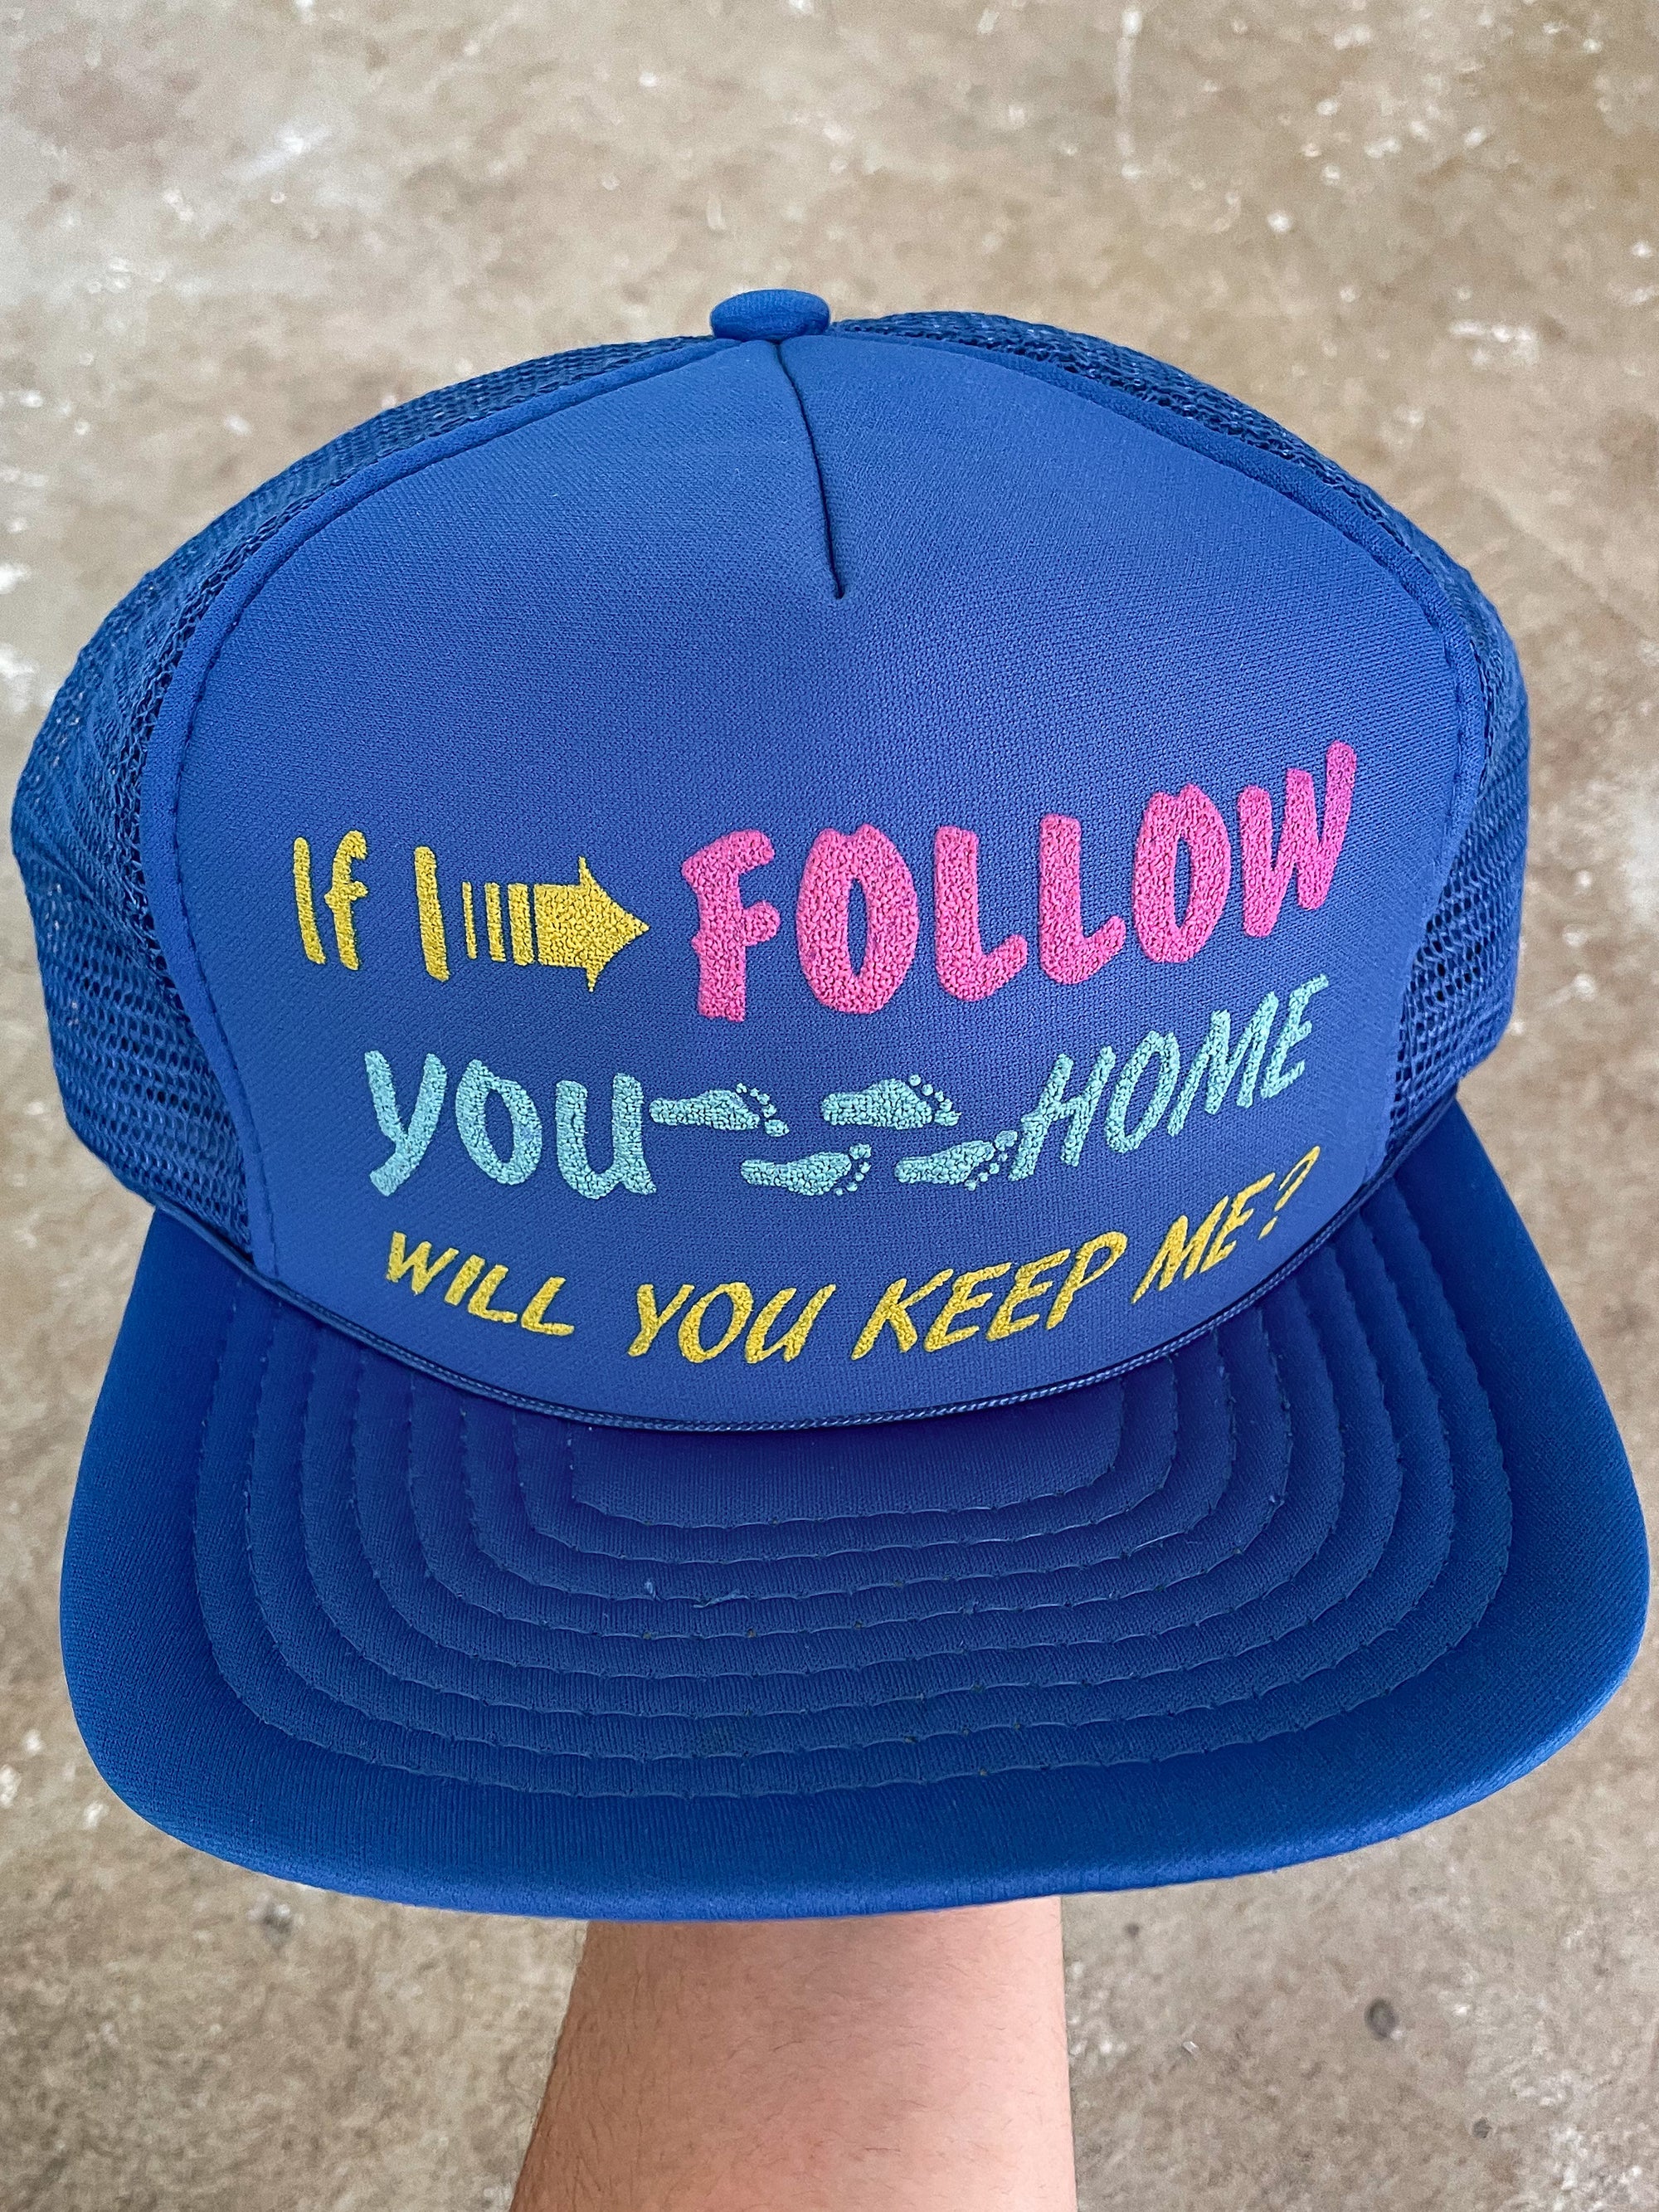 1980s “Will You Keep Me?” Trucker Hat